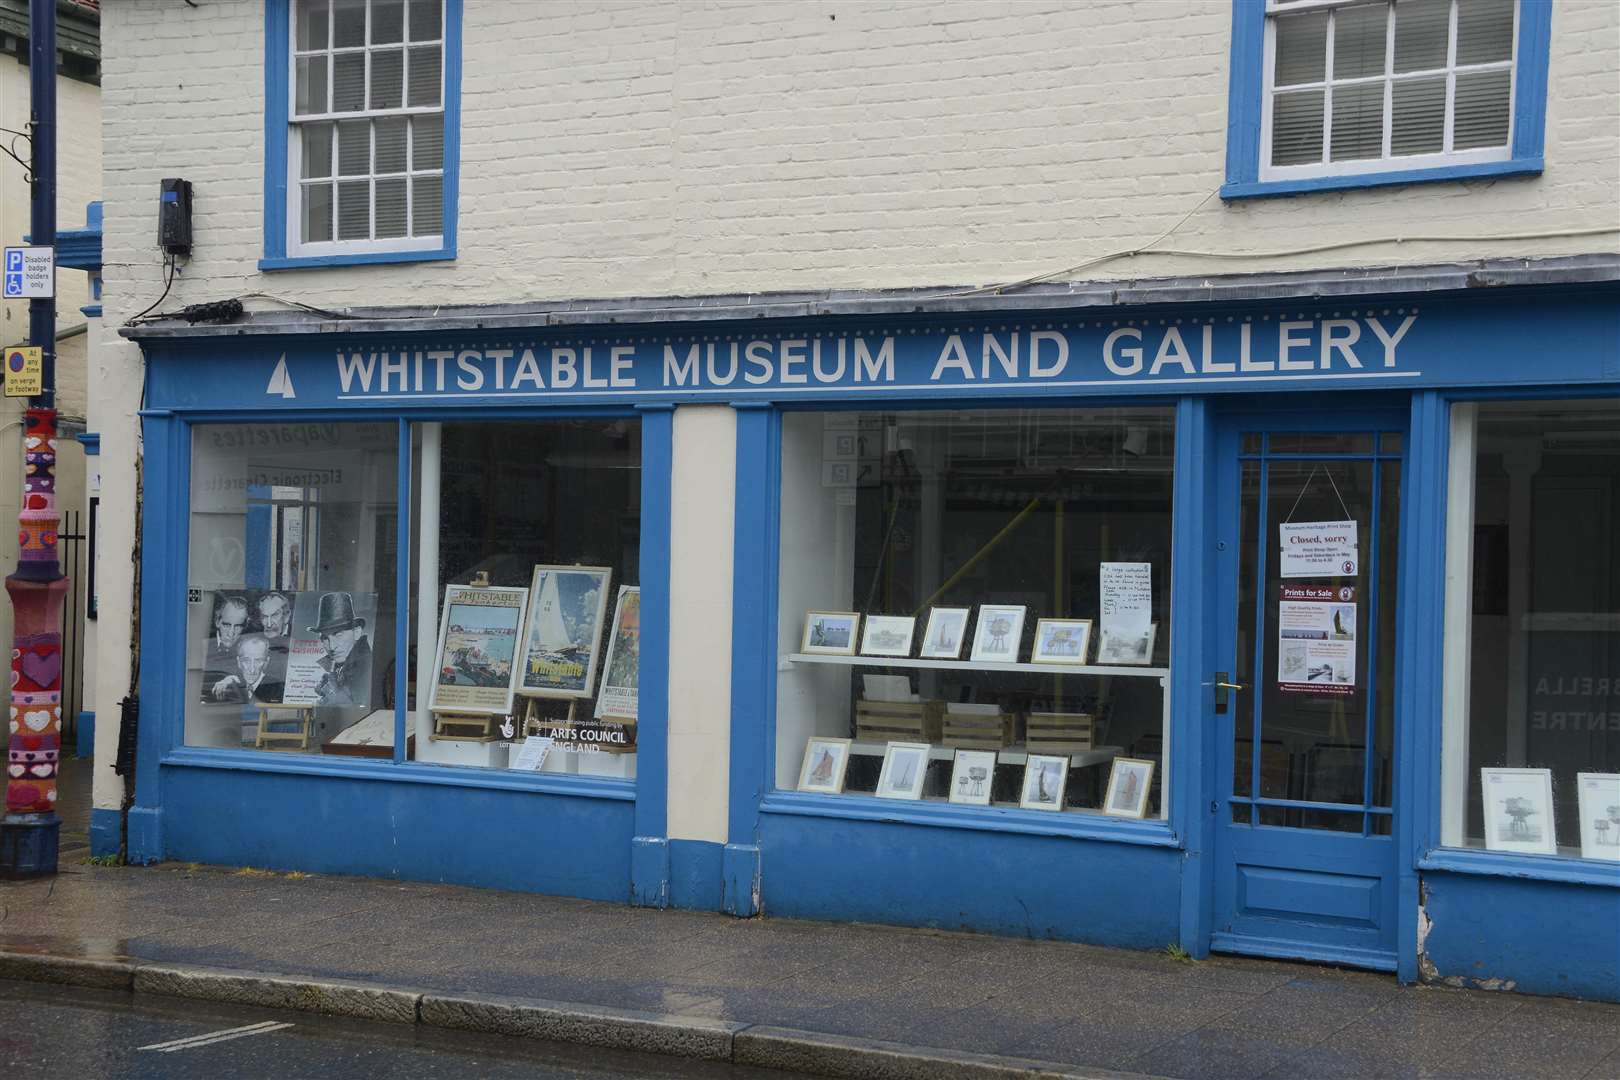 Whitstable Museum and Gallery